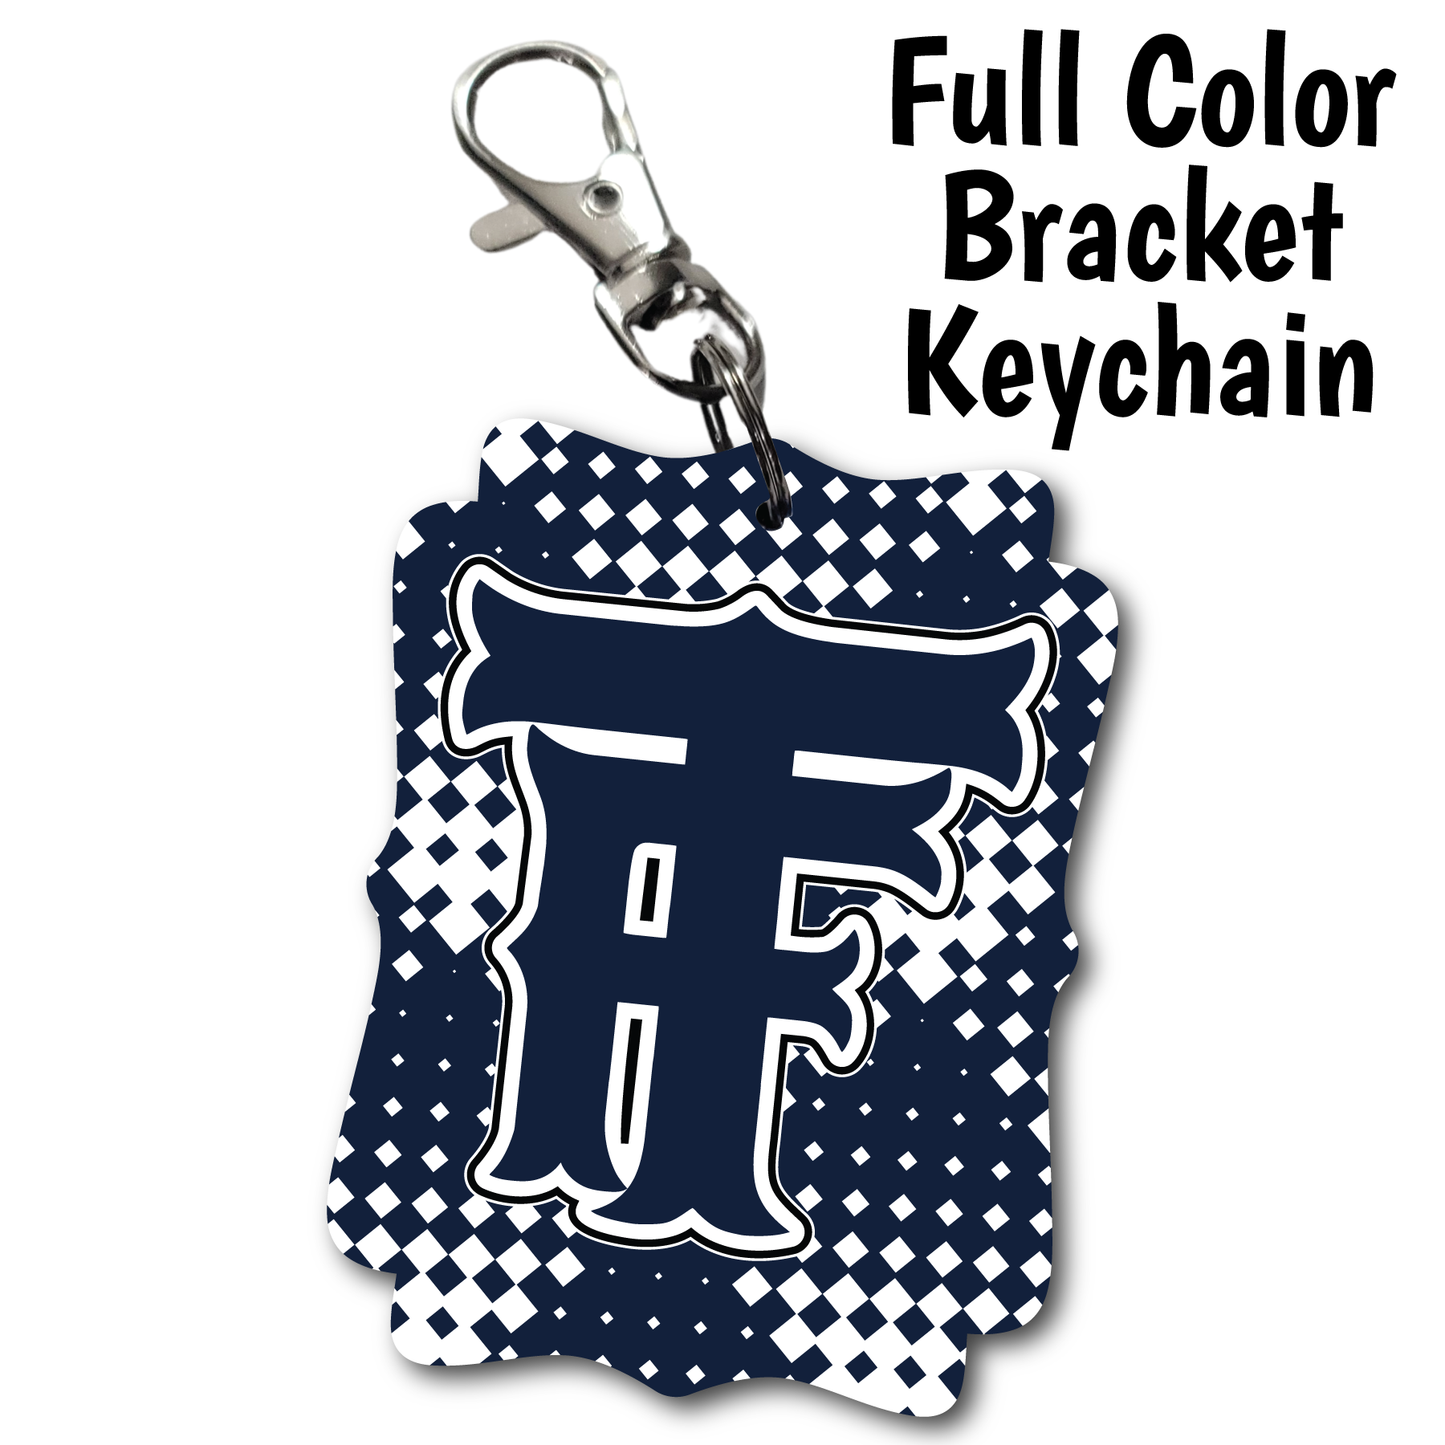 Twin Falls Bruins - Full Color Keychains